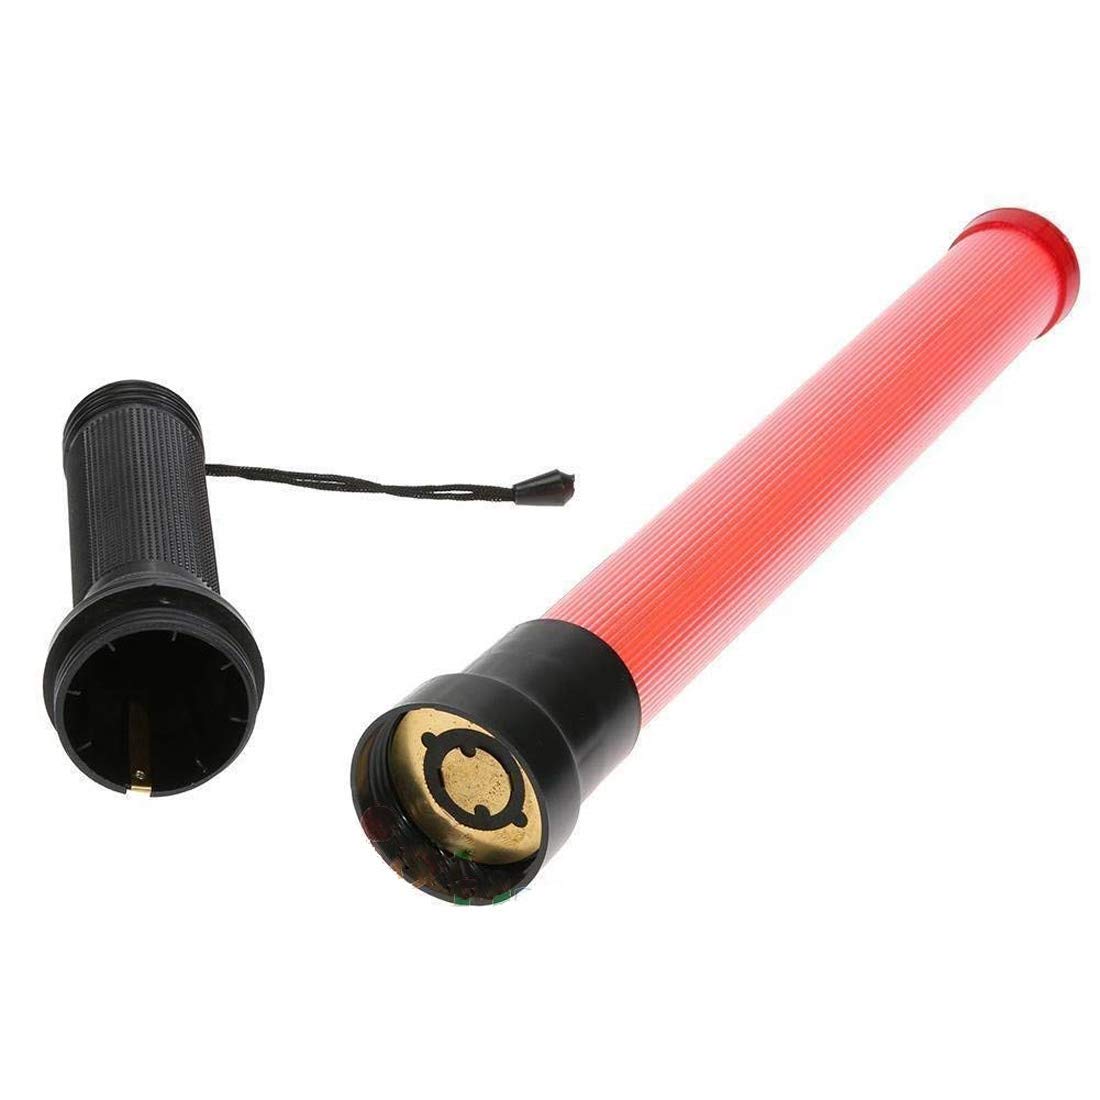 Traffic Safety Rescue Signal Road Control Warning Flashing Light LED Wand Baton (Pack of 2 Pieces; 21-inch; Red and Green)